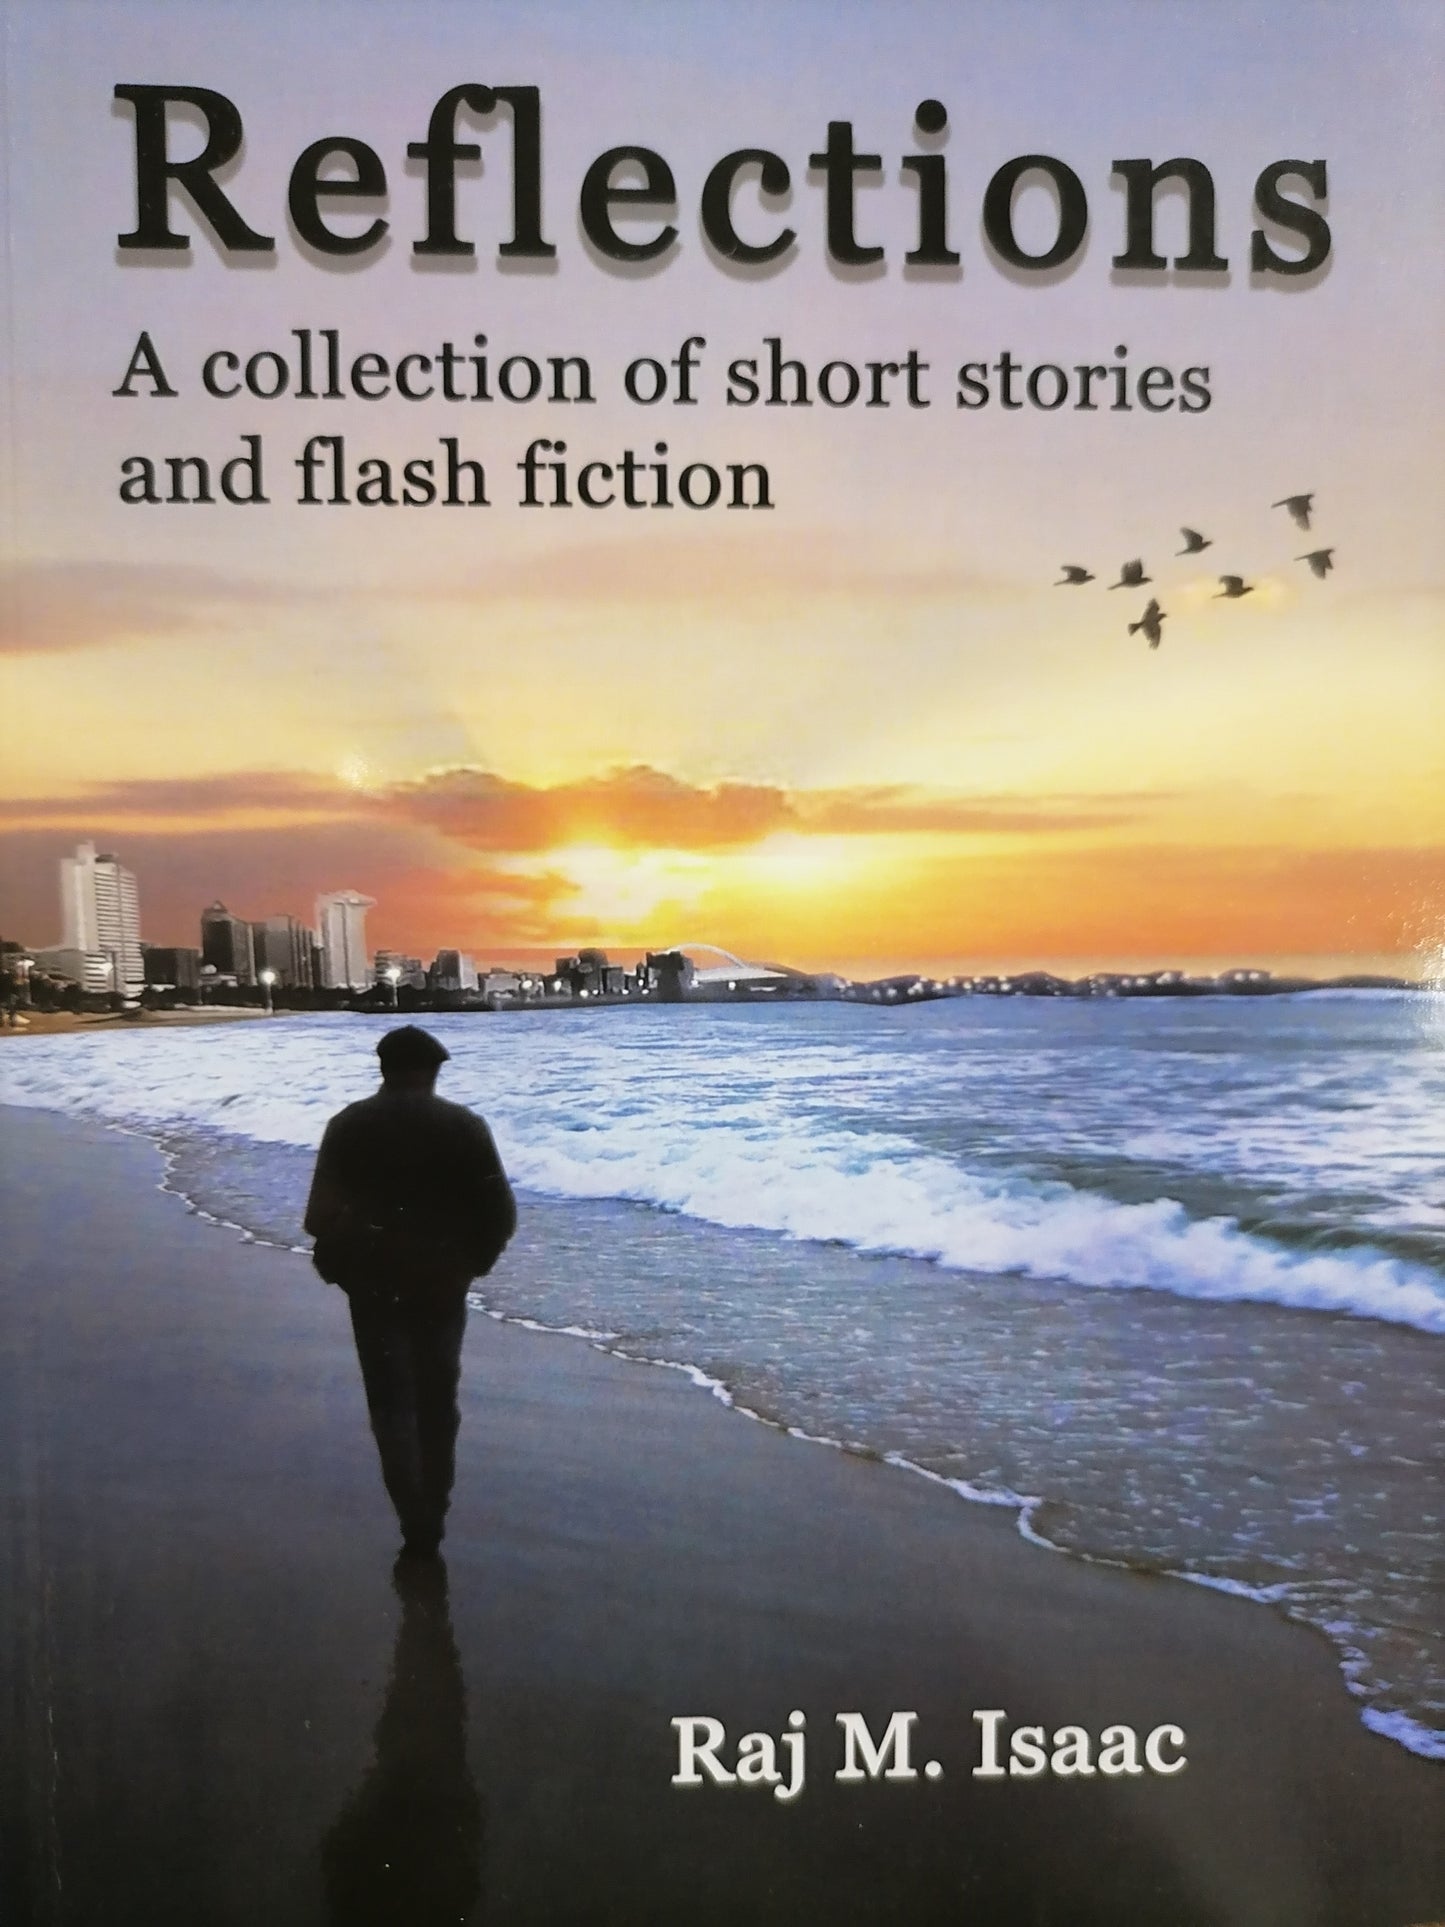 Reflections: a collection of short stories and flash fiction, by Raj M. Isaac